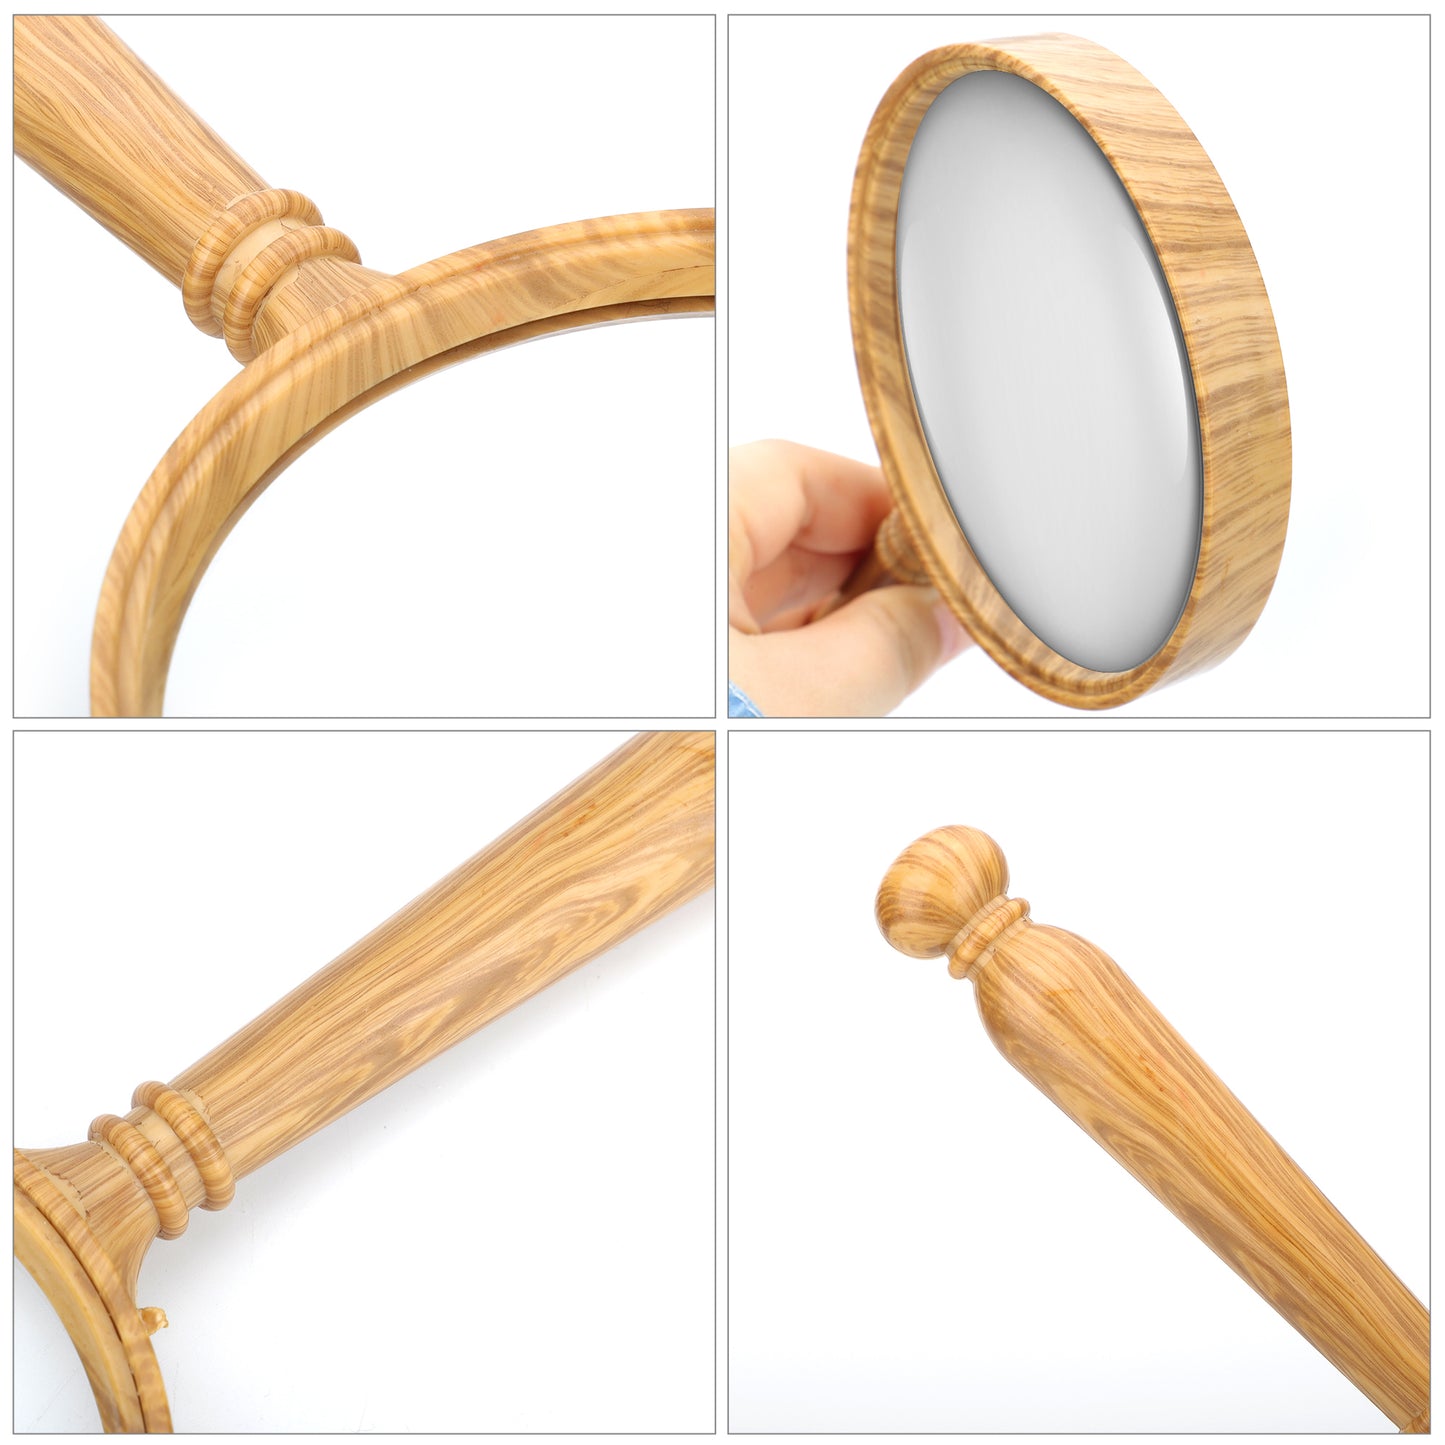 Handheld Magnifying Glass - 10 times Magnification for Science, Reading, and Inspection Tasks